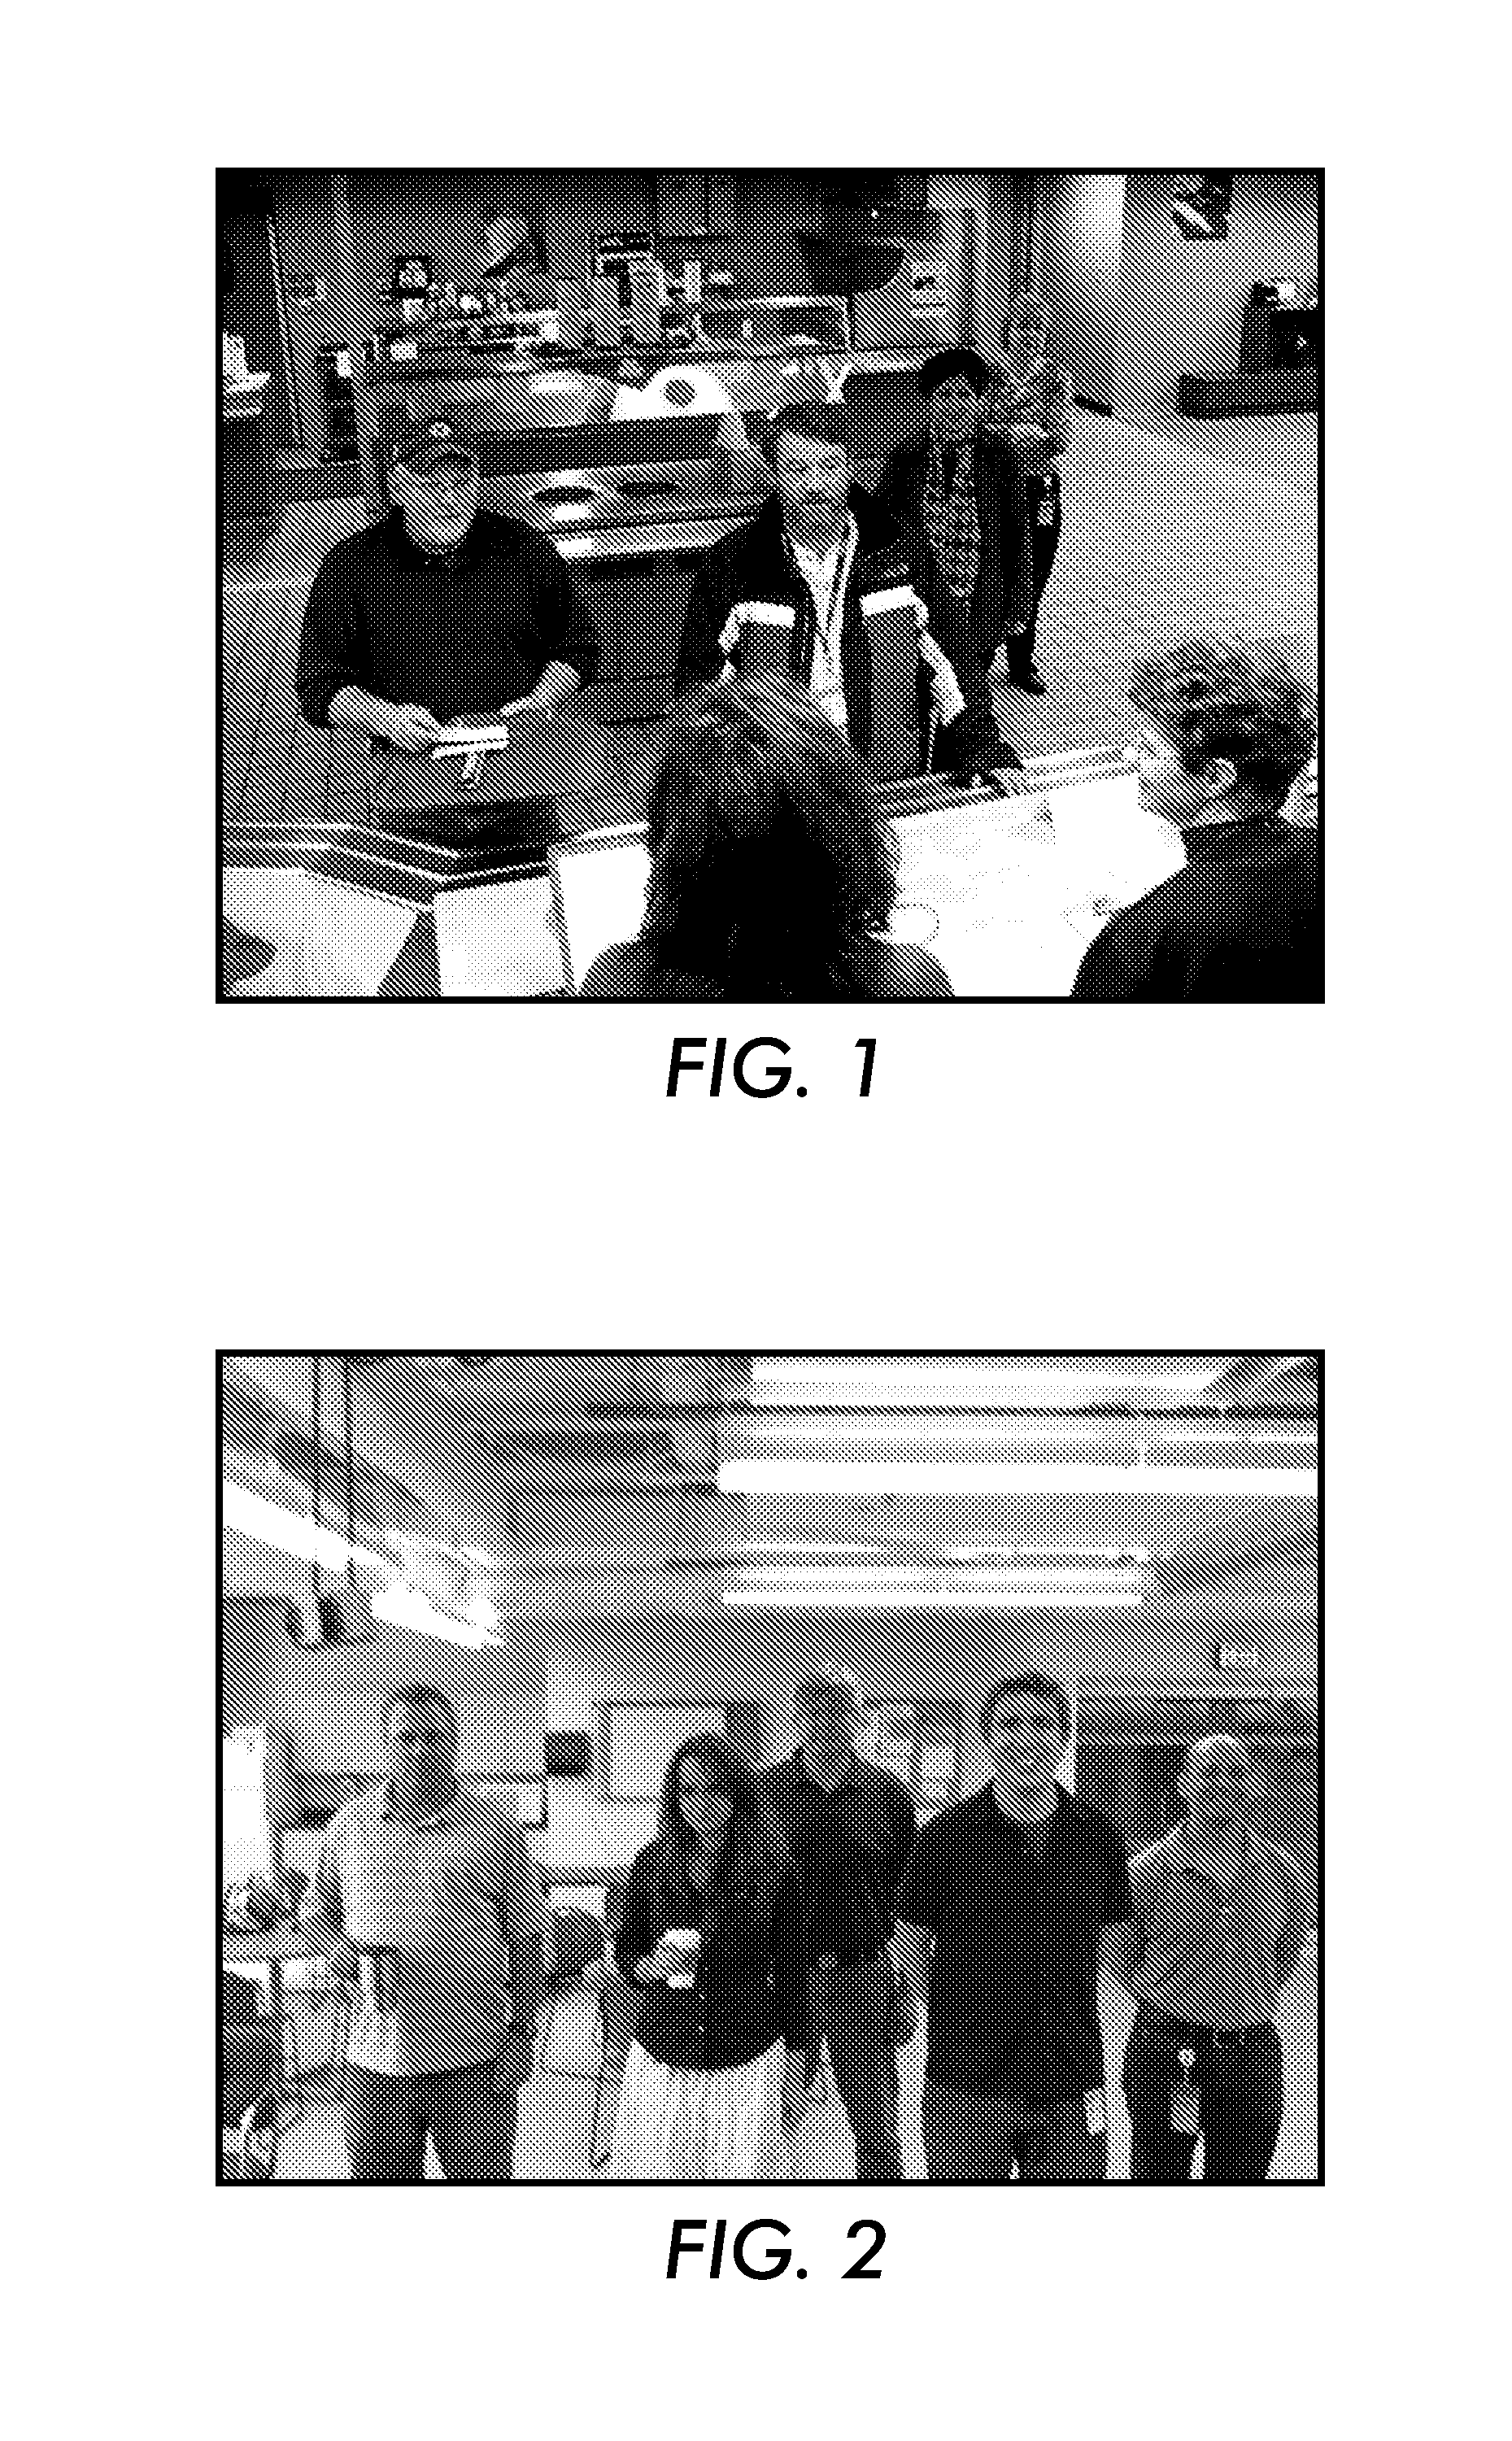 Method and system for automatically recognizing facial expressions via algorithmic periocular localization